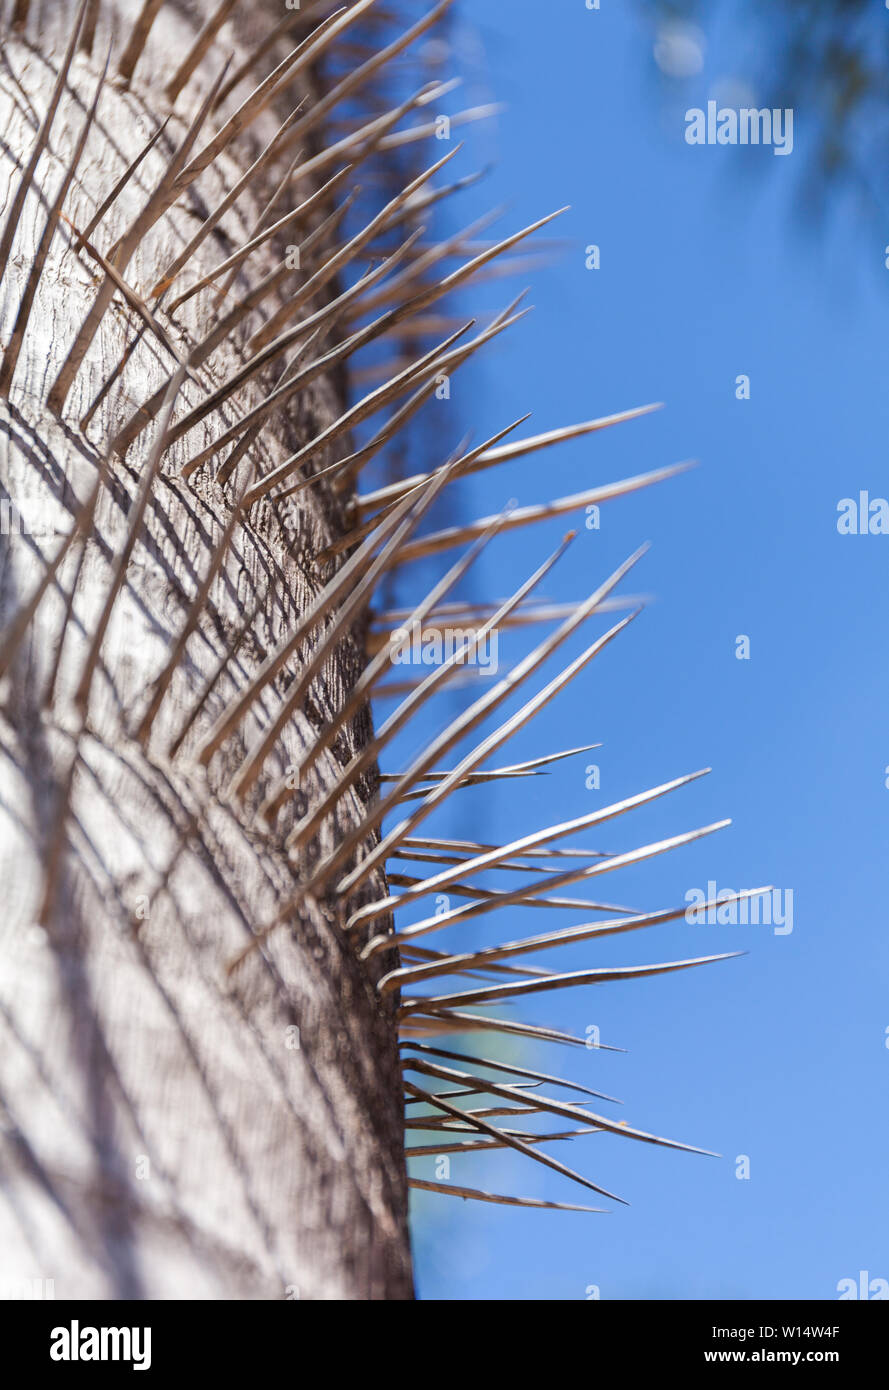 Trunk of a spiny palm tree. A close up color image of the spikes against the blue sky Stock Photo